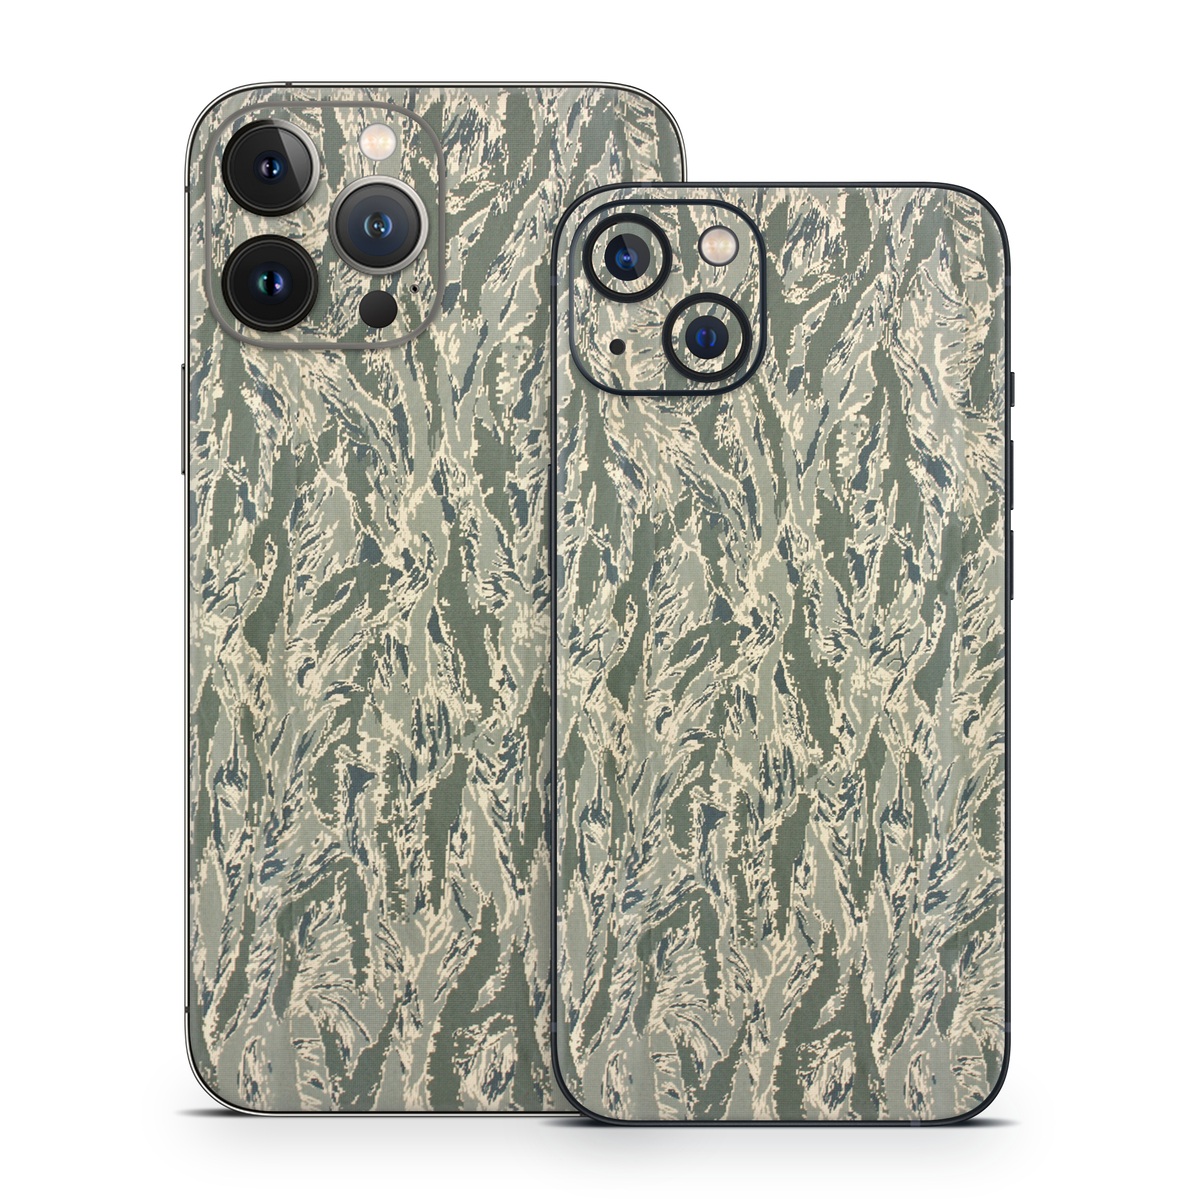 iPhone 13 Series Skin design of Pattern, Grass, Plant, with gray, green colors